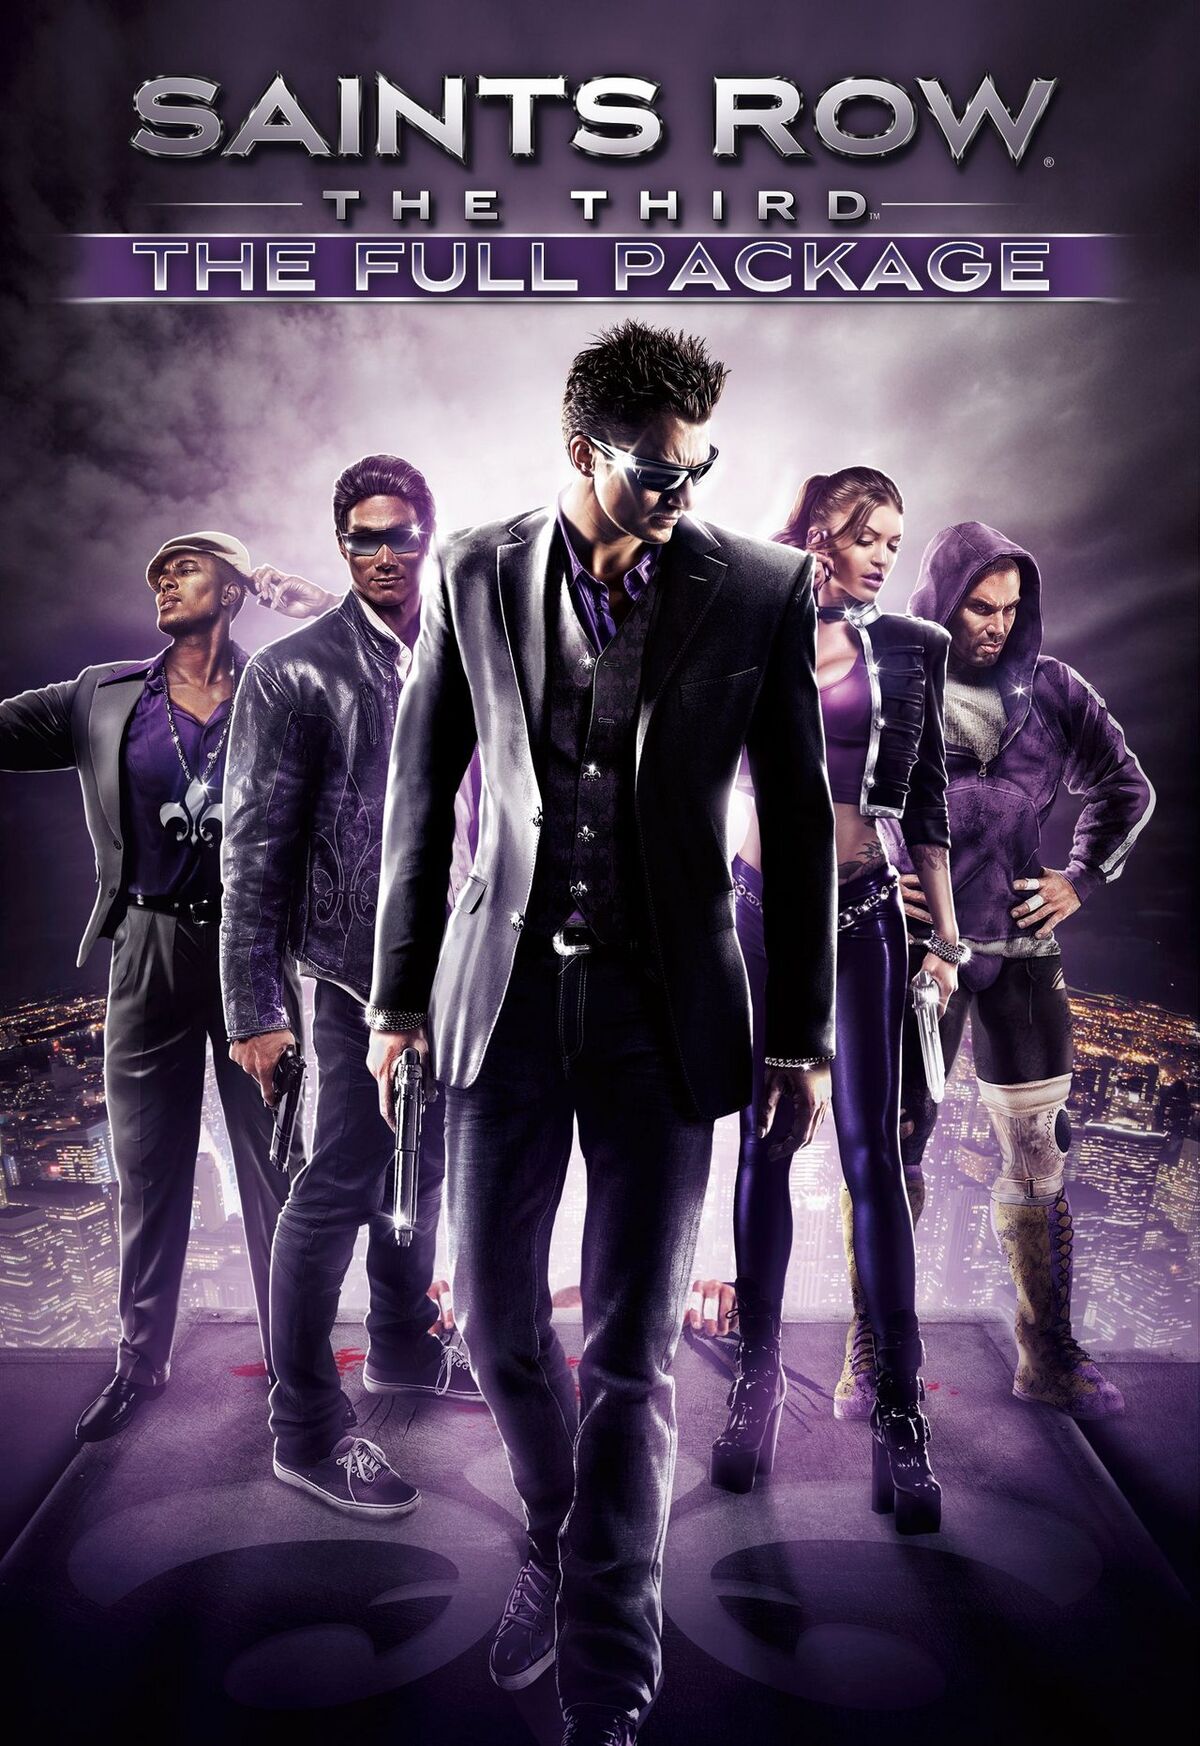 Saints Row The Third: The Full Package - PlayStation 3